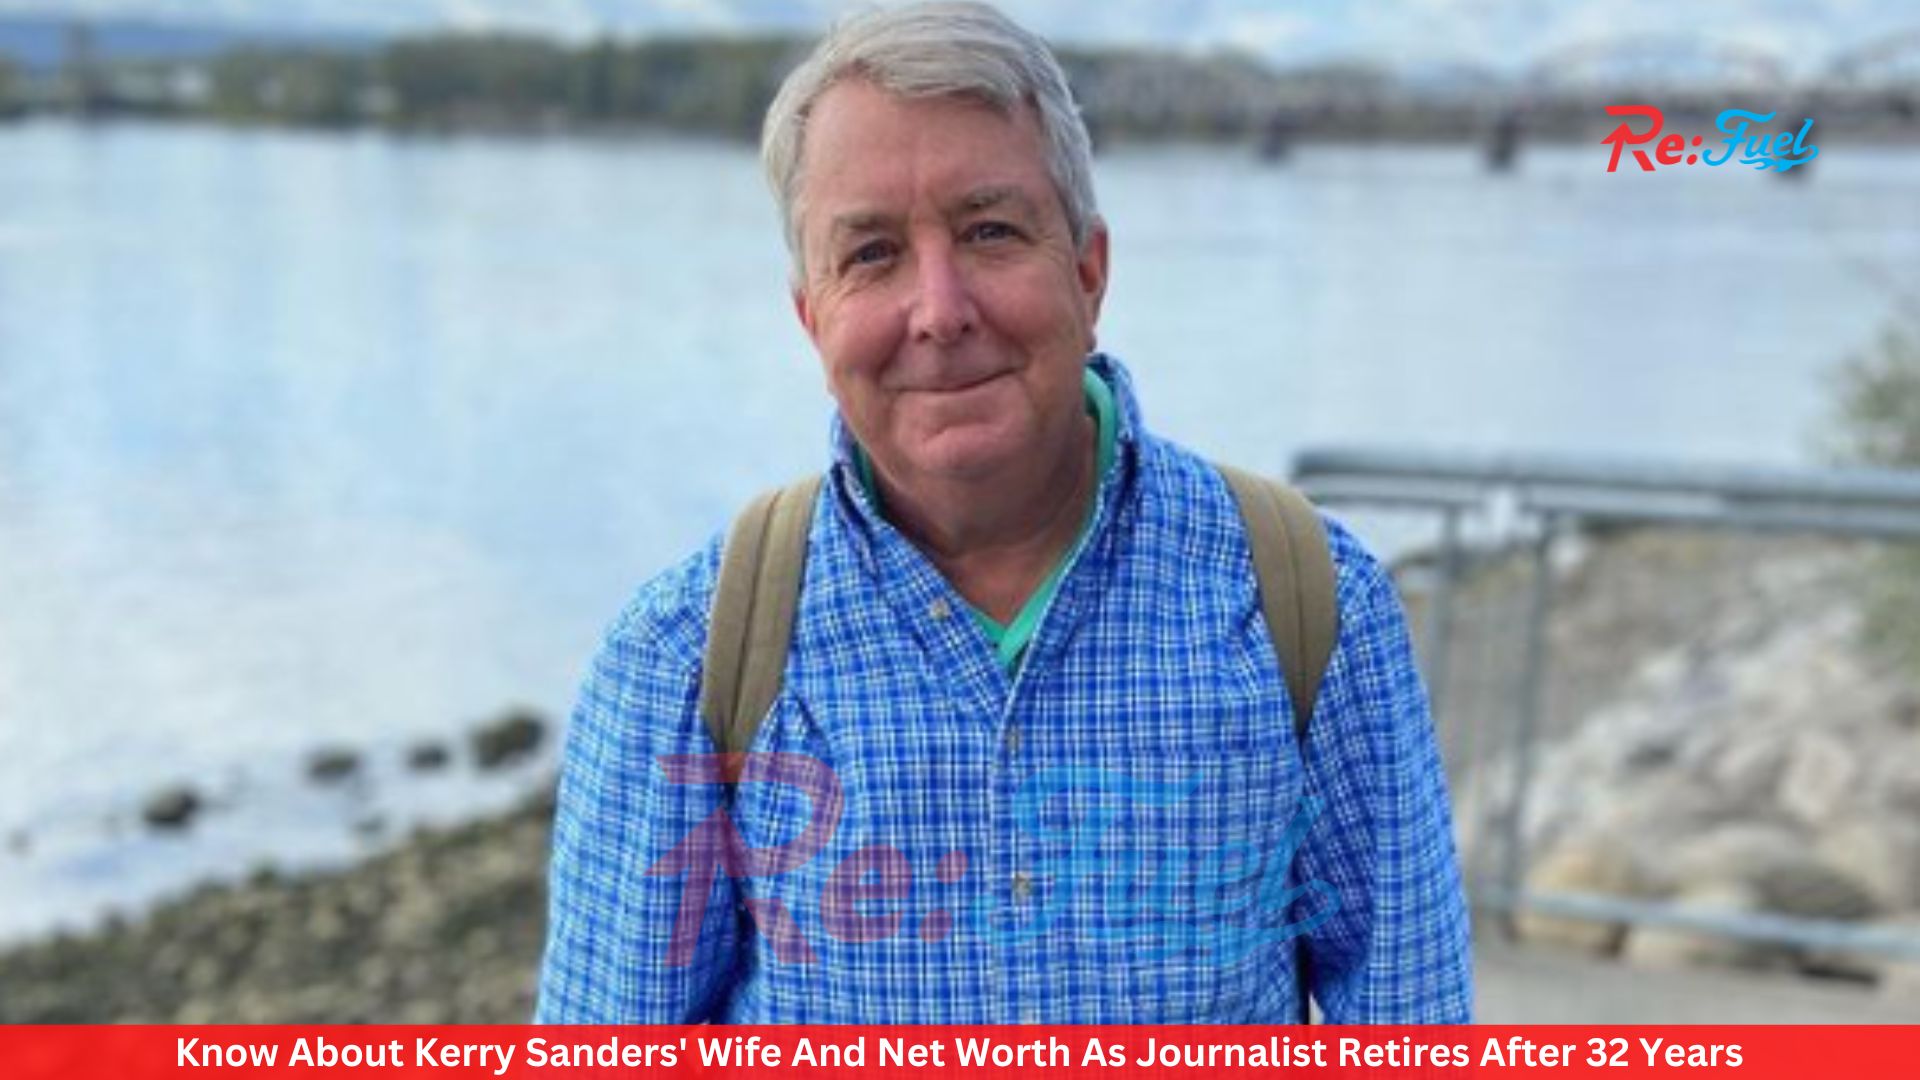 Know About Kerry Sanders' Wife And Net Worth As Journalist Retires After 32 Years